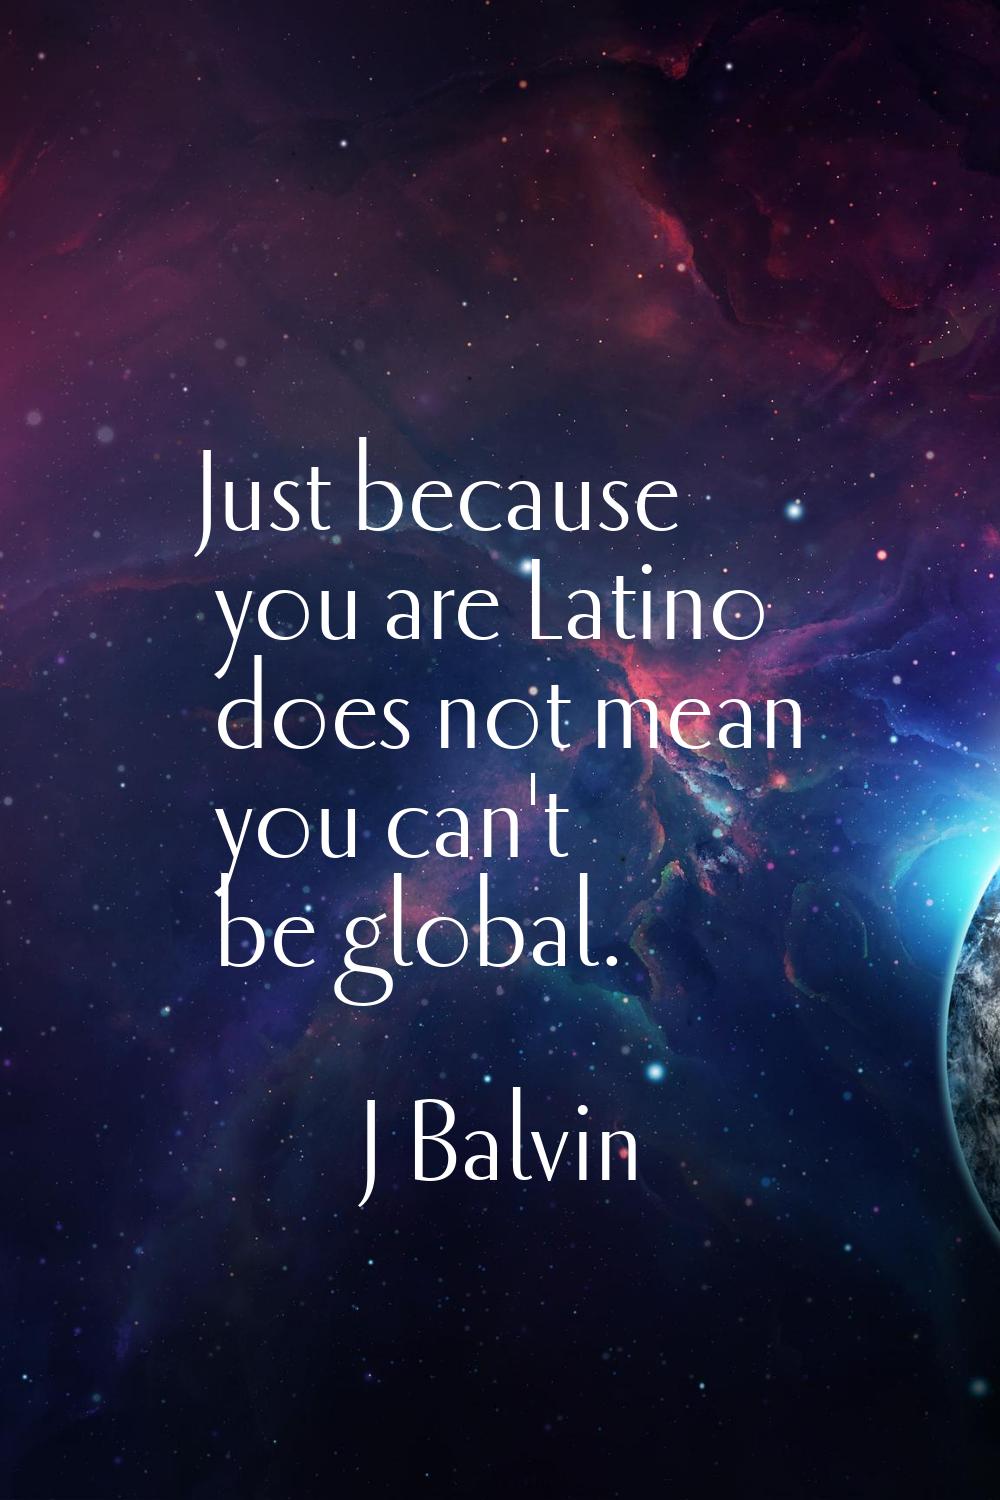 Just because you are Latino does not mean you can't be global.